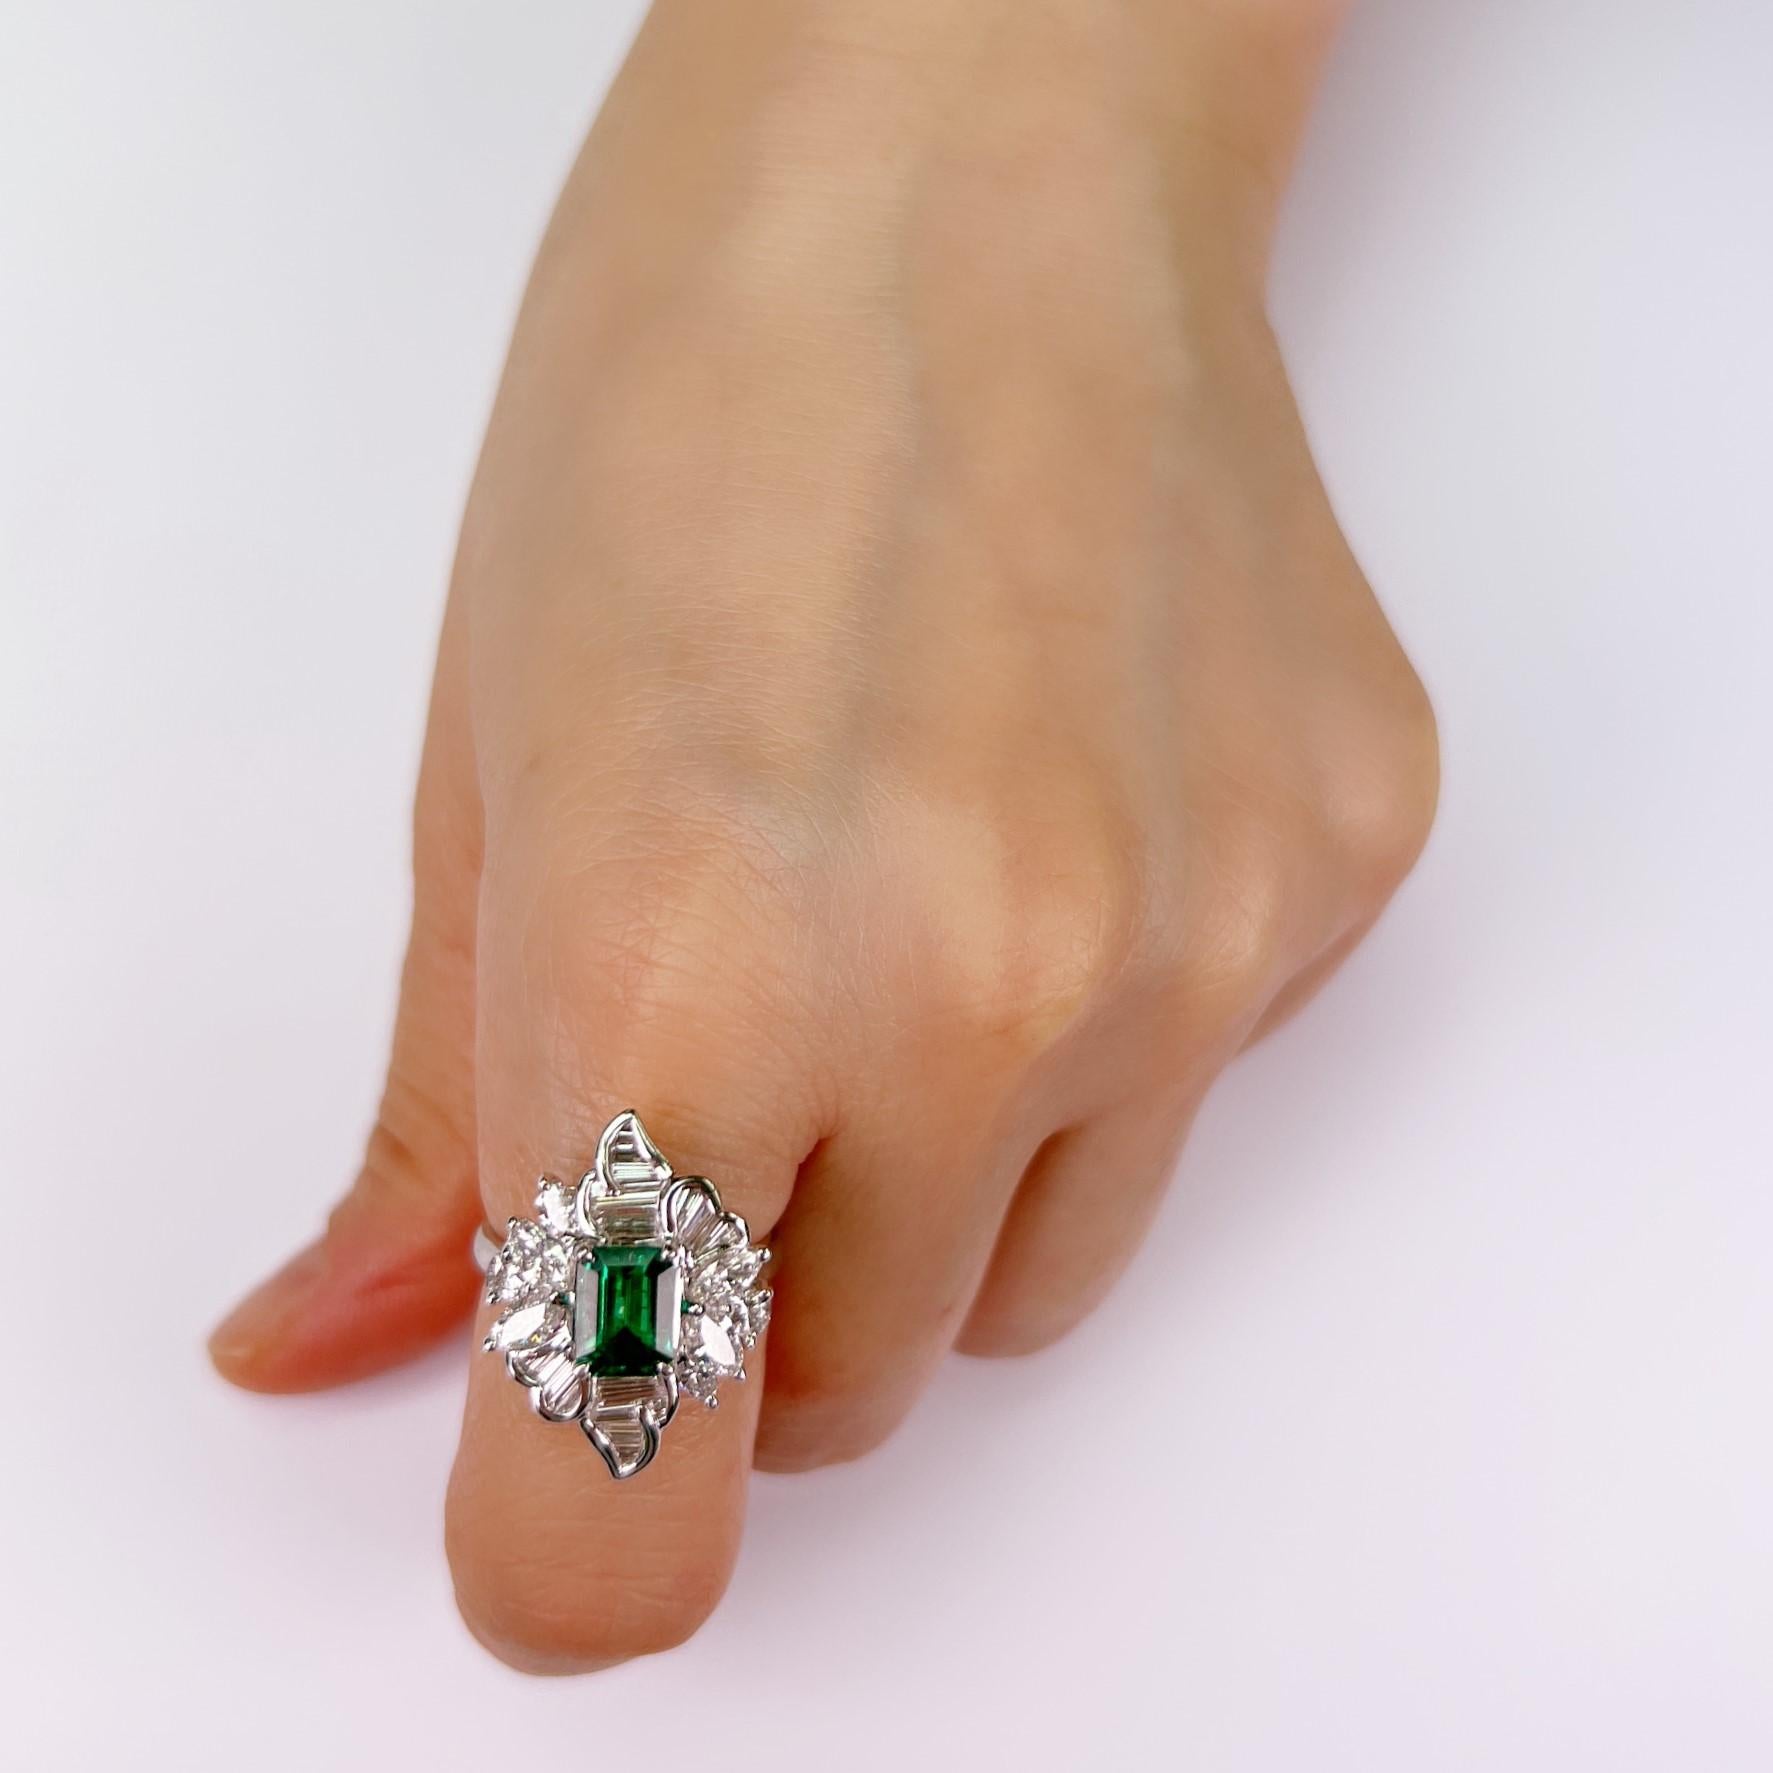 Women's 2.79 Carat Emerald and Diamond Ring on PT900 Platinum For Sale